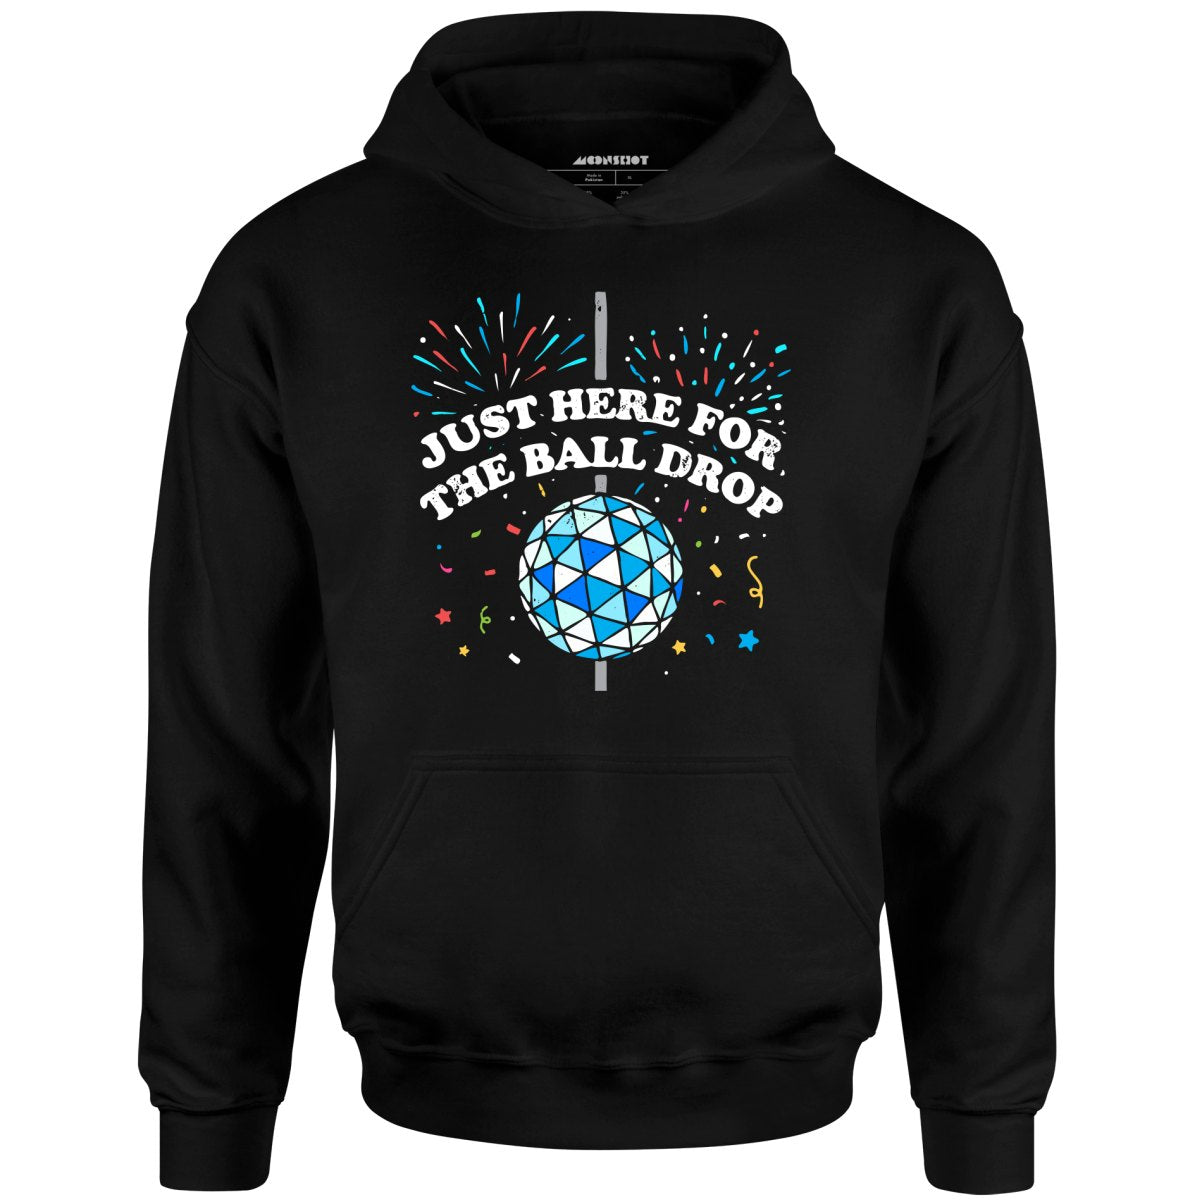 Just Here for The Ball Drop - Unisex Hoodie